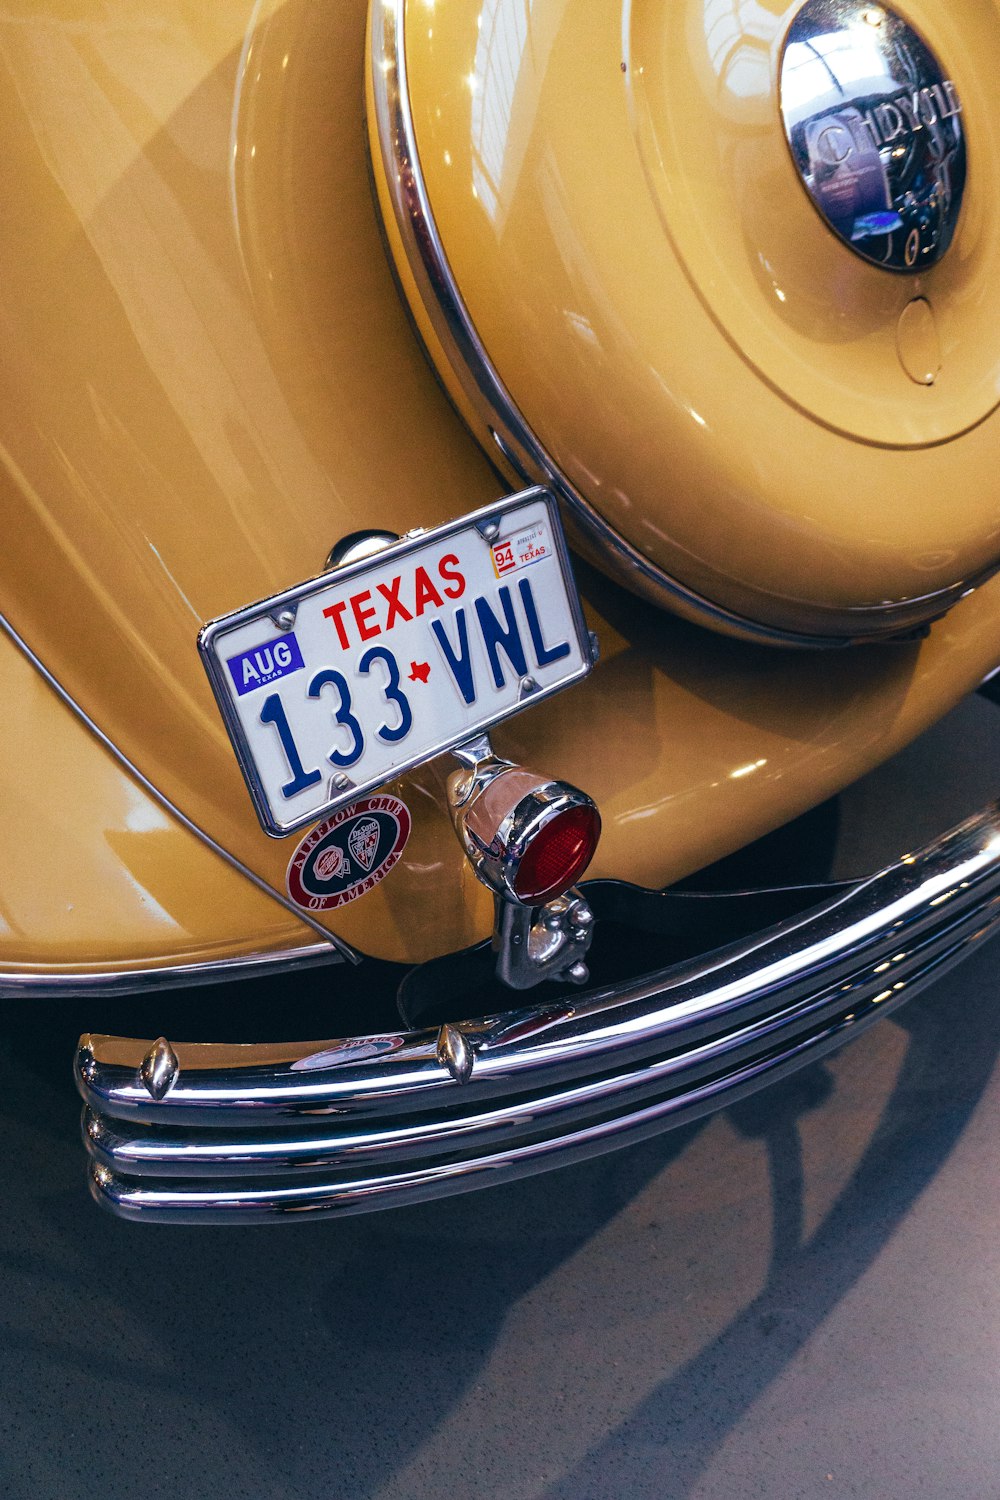 a close up of a yellow car with a license plate